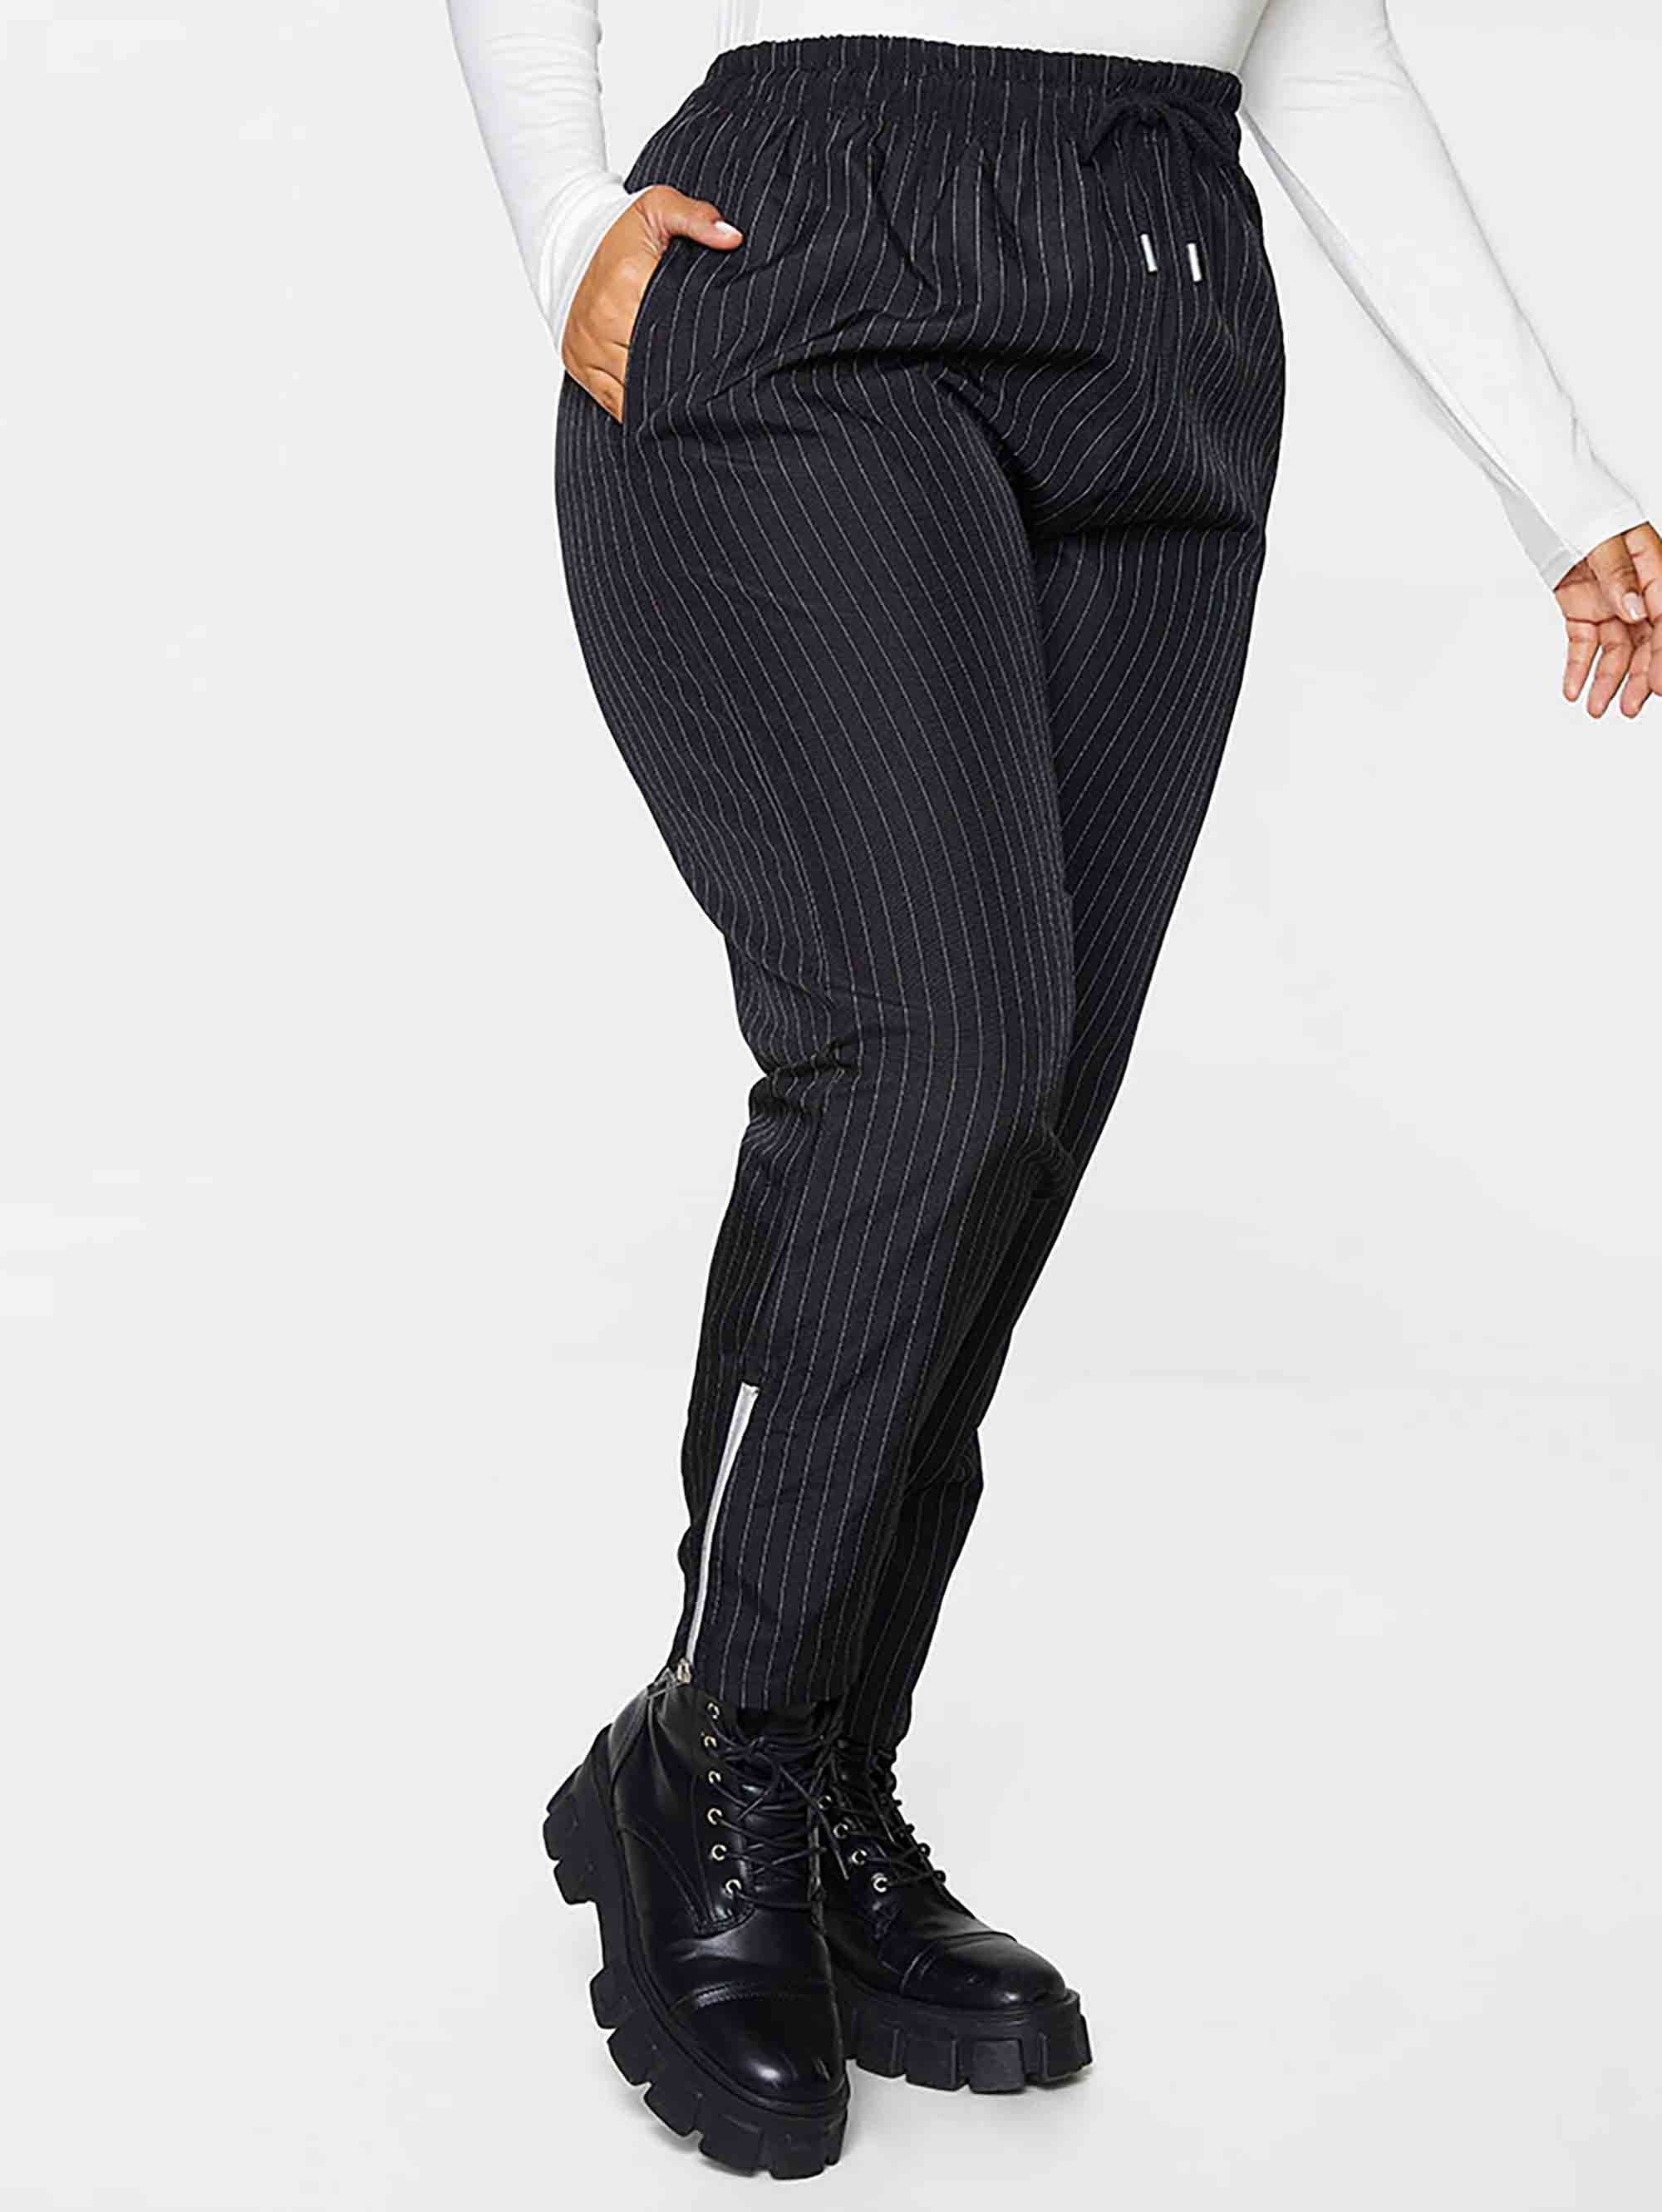 Plus Black Pinstripe High Waist With Contrast Zip Trousers 